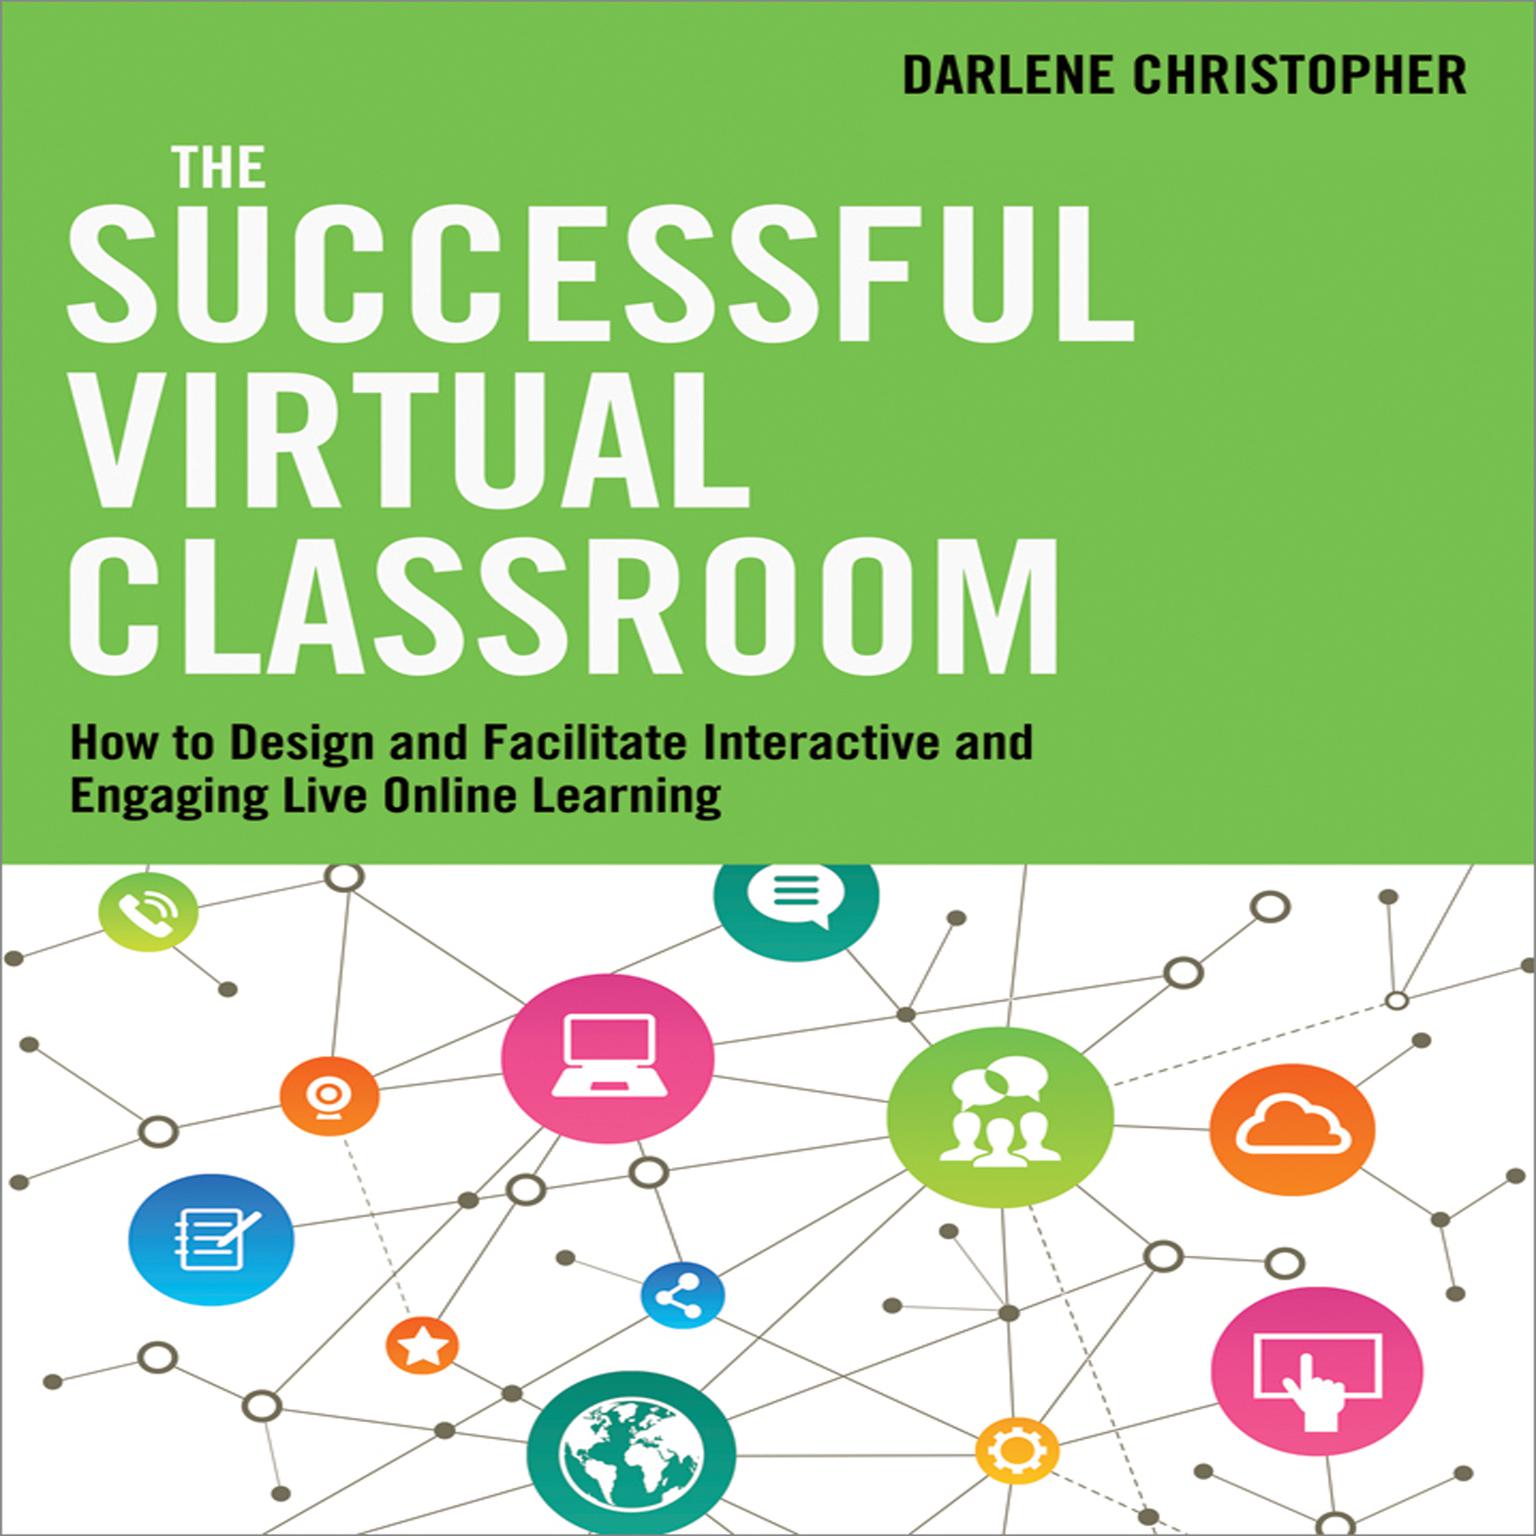 The Successful Virtual Classroom: How to Design and Facilitate Interactive and Engaging Live Online Learning Audiobook, by Darlene Christopher